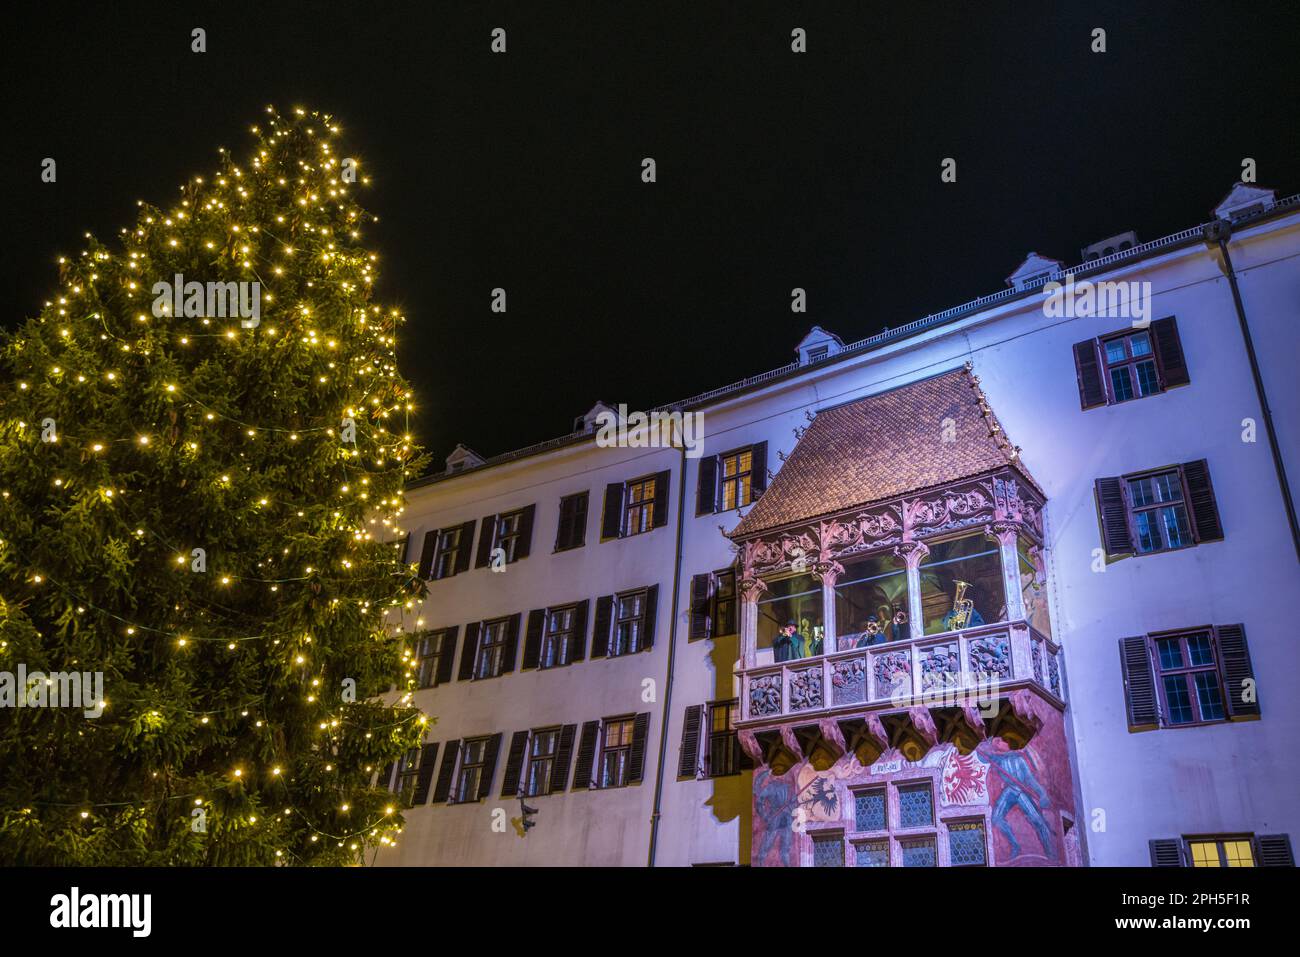 The beautiful and colorful Innsbruck Christmas market in Austria. Stock Photo